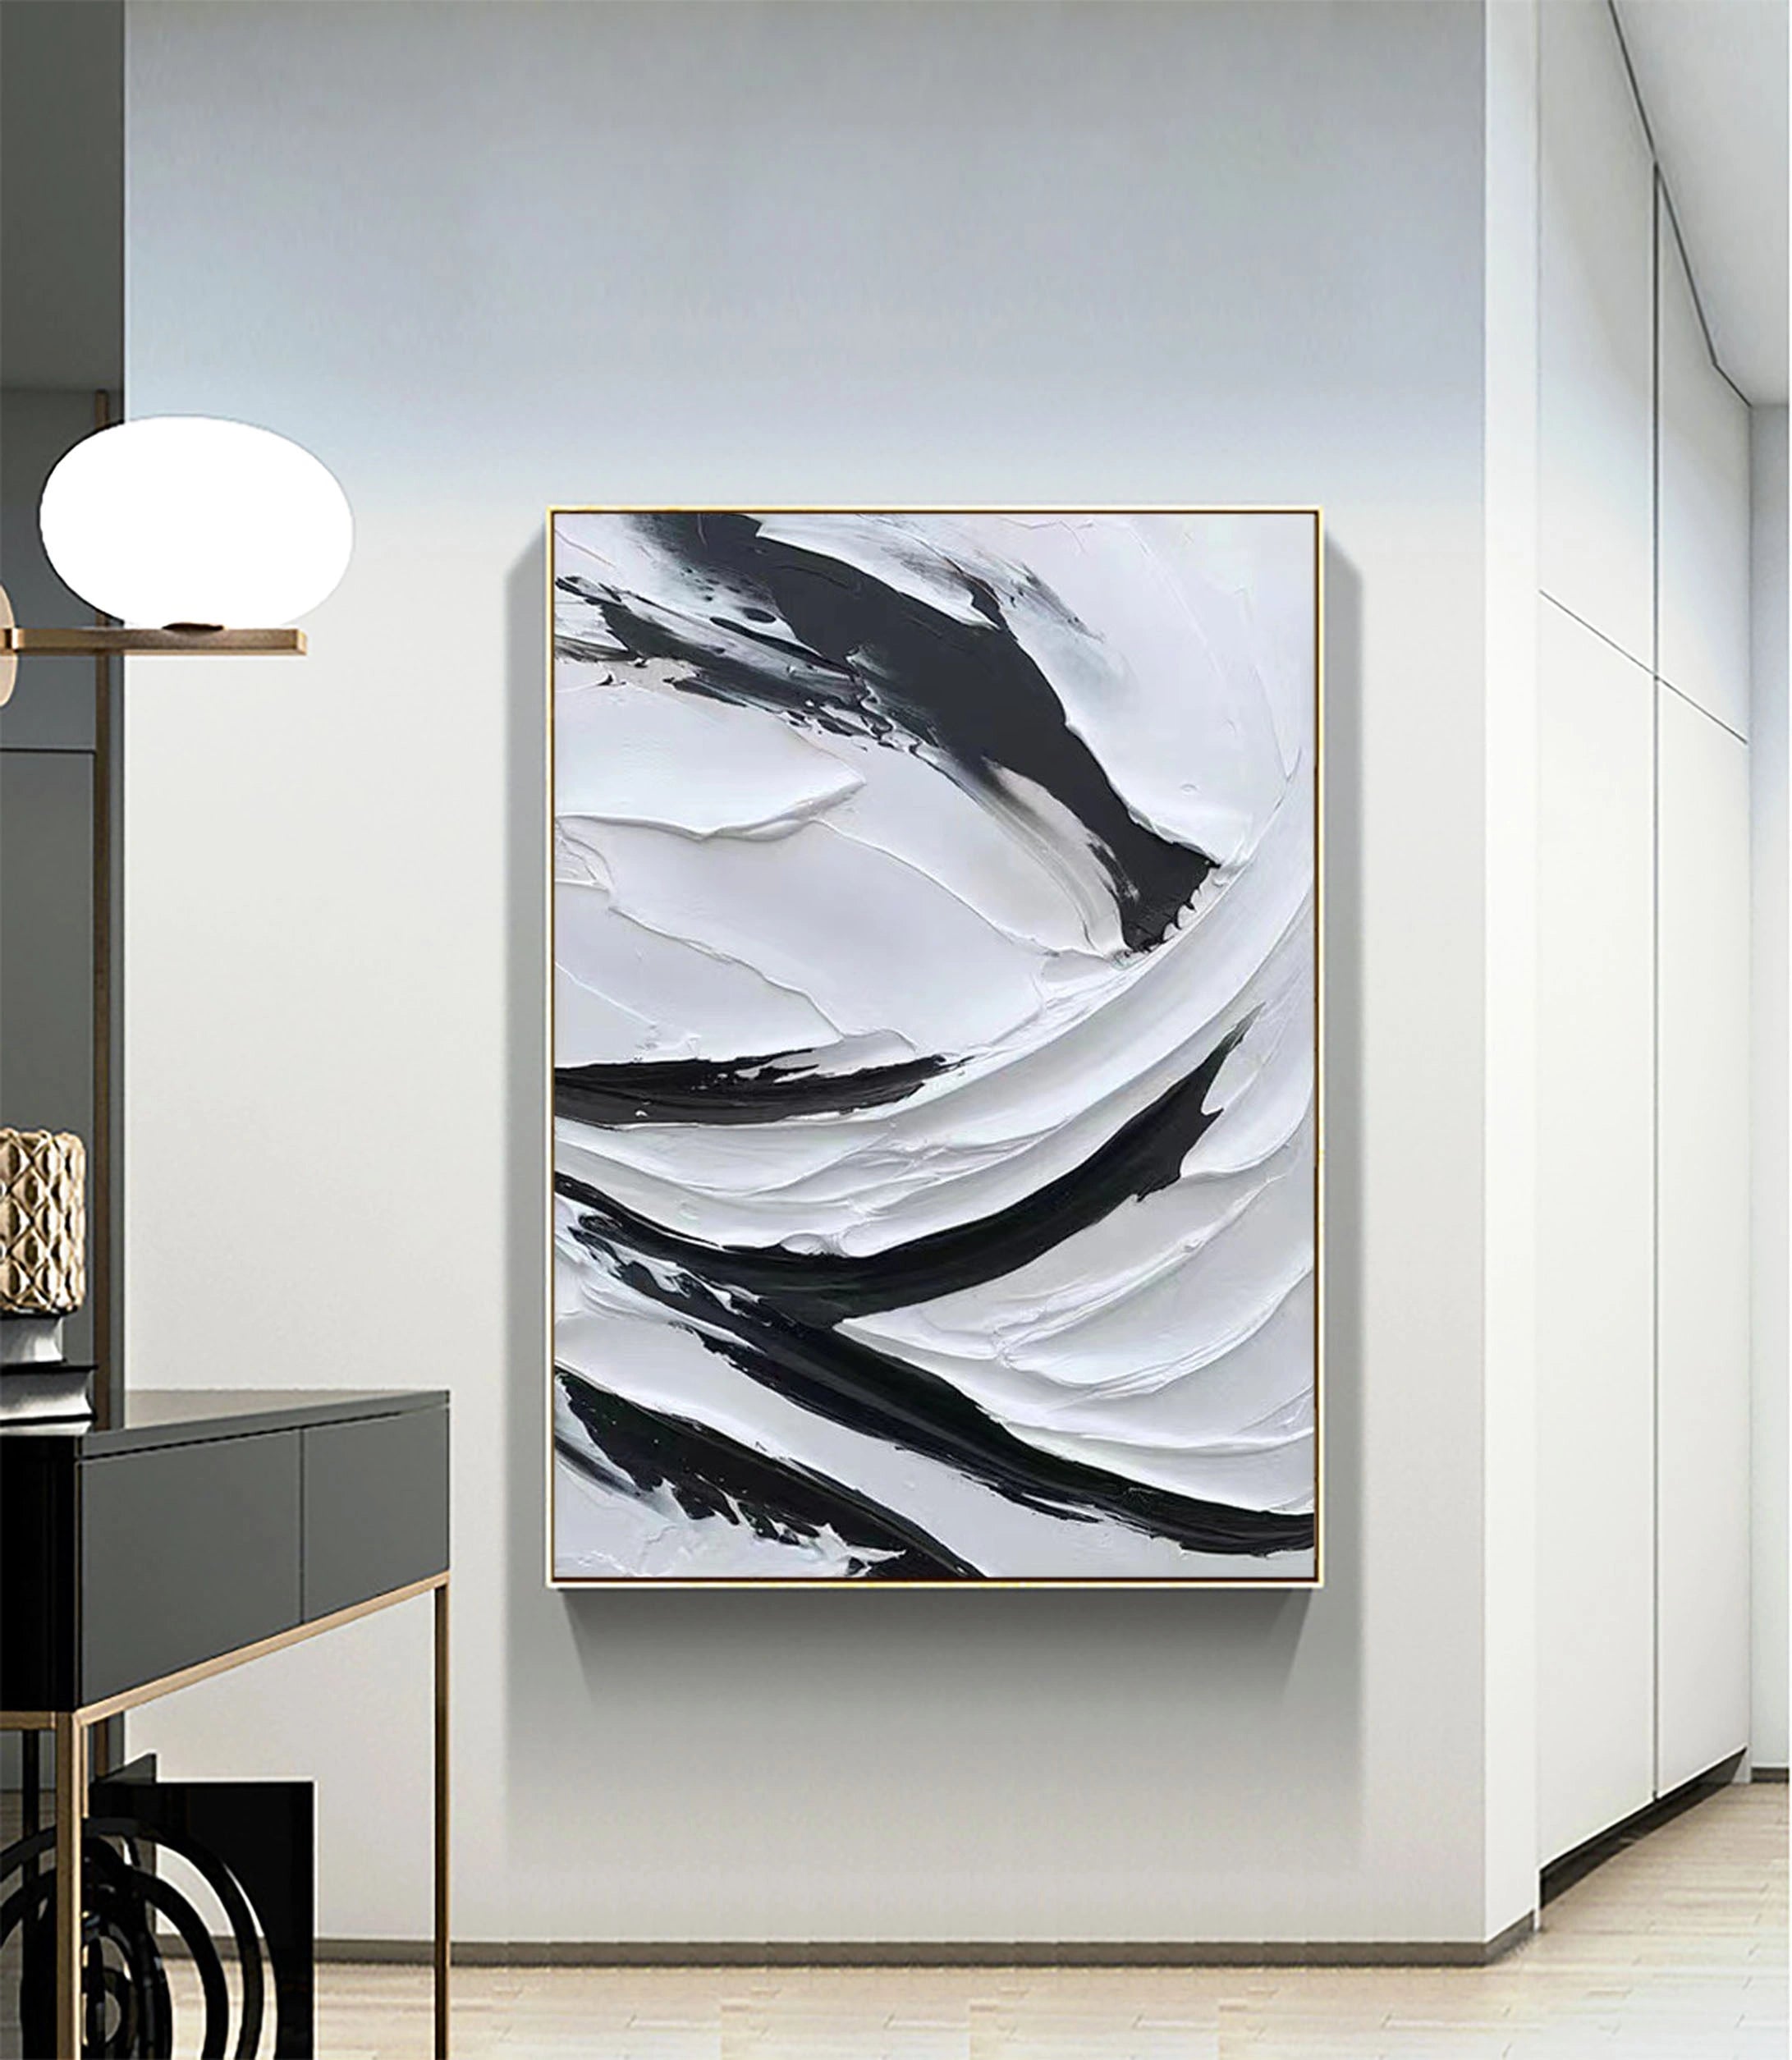 Black and White Plaster Art Textured Painting on Canvas Wall Decor